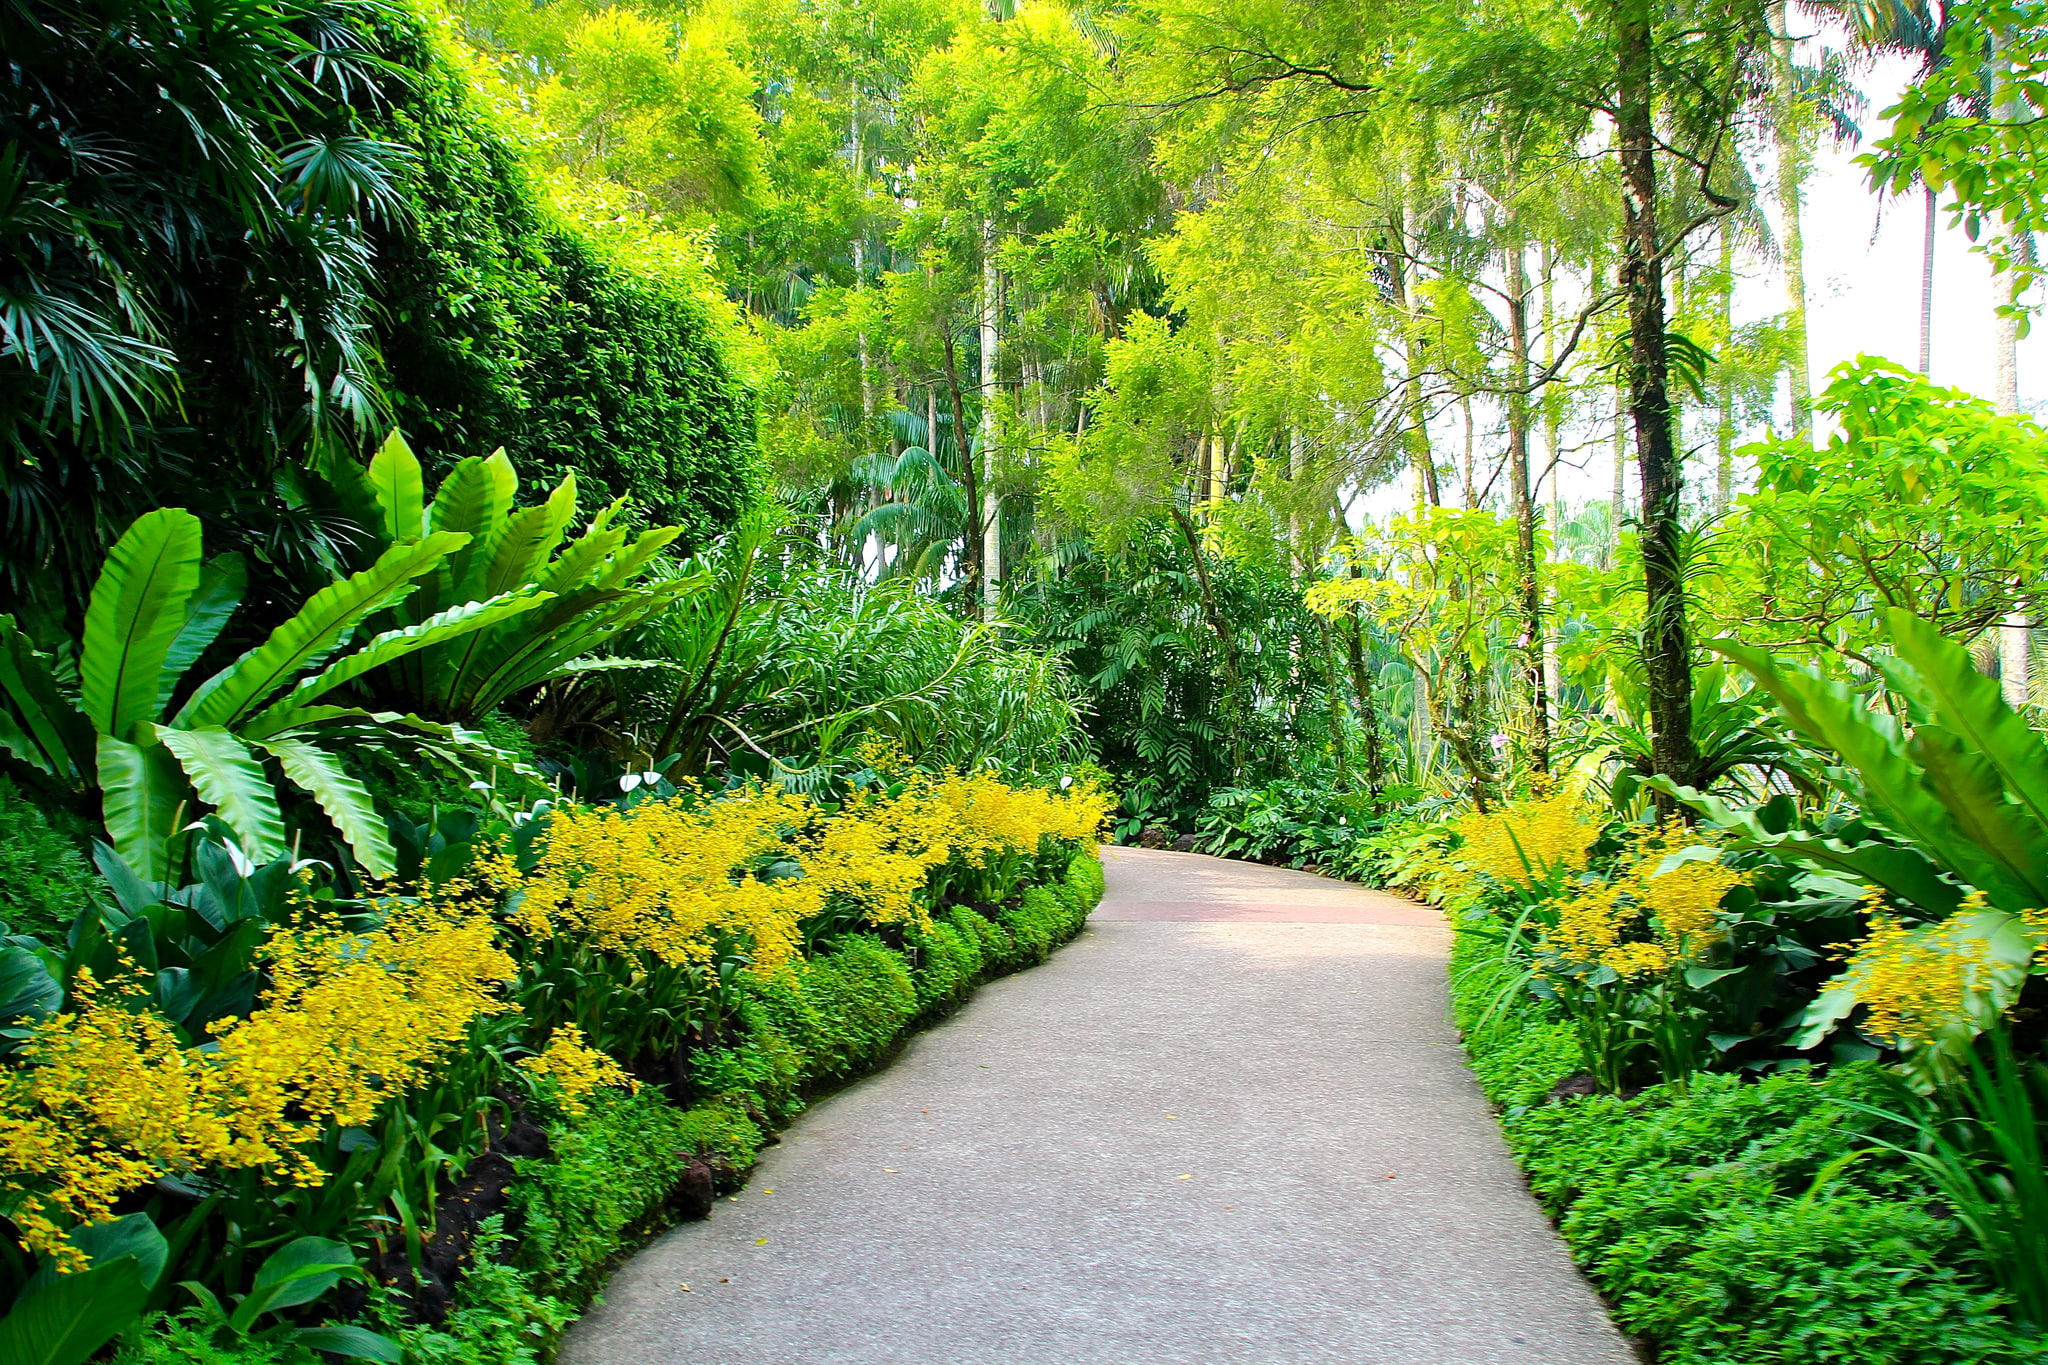 greens, trees, garden, track, Singapore, alley, the bushes